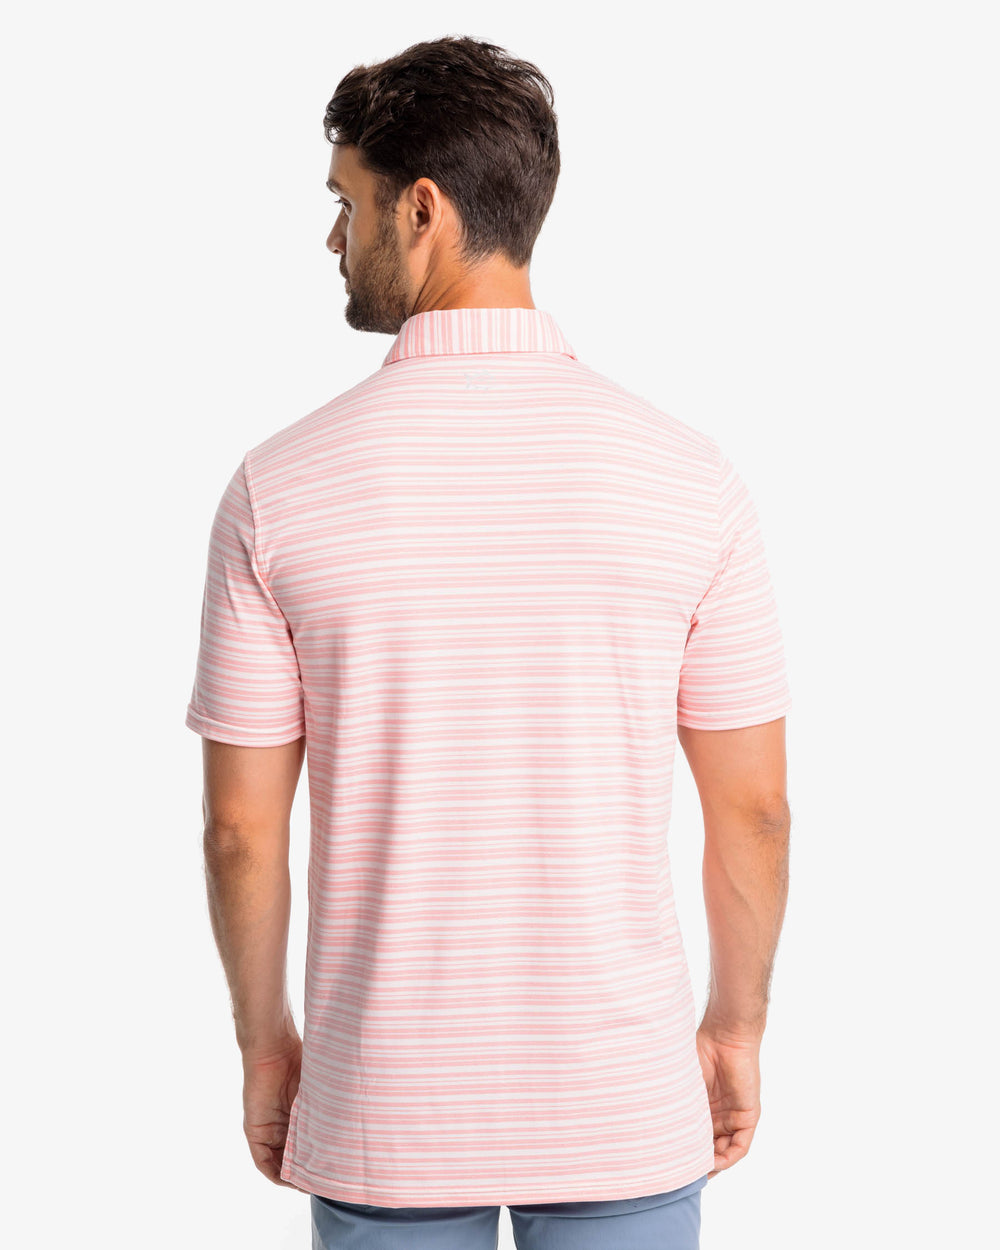 The back view of the Southern Tide Ryder Heather Bombay Striped Polo Shirt by Southern Tide - Heather Flamingo Pink